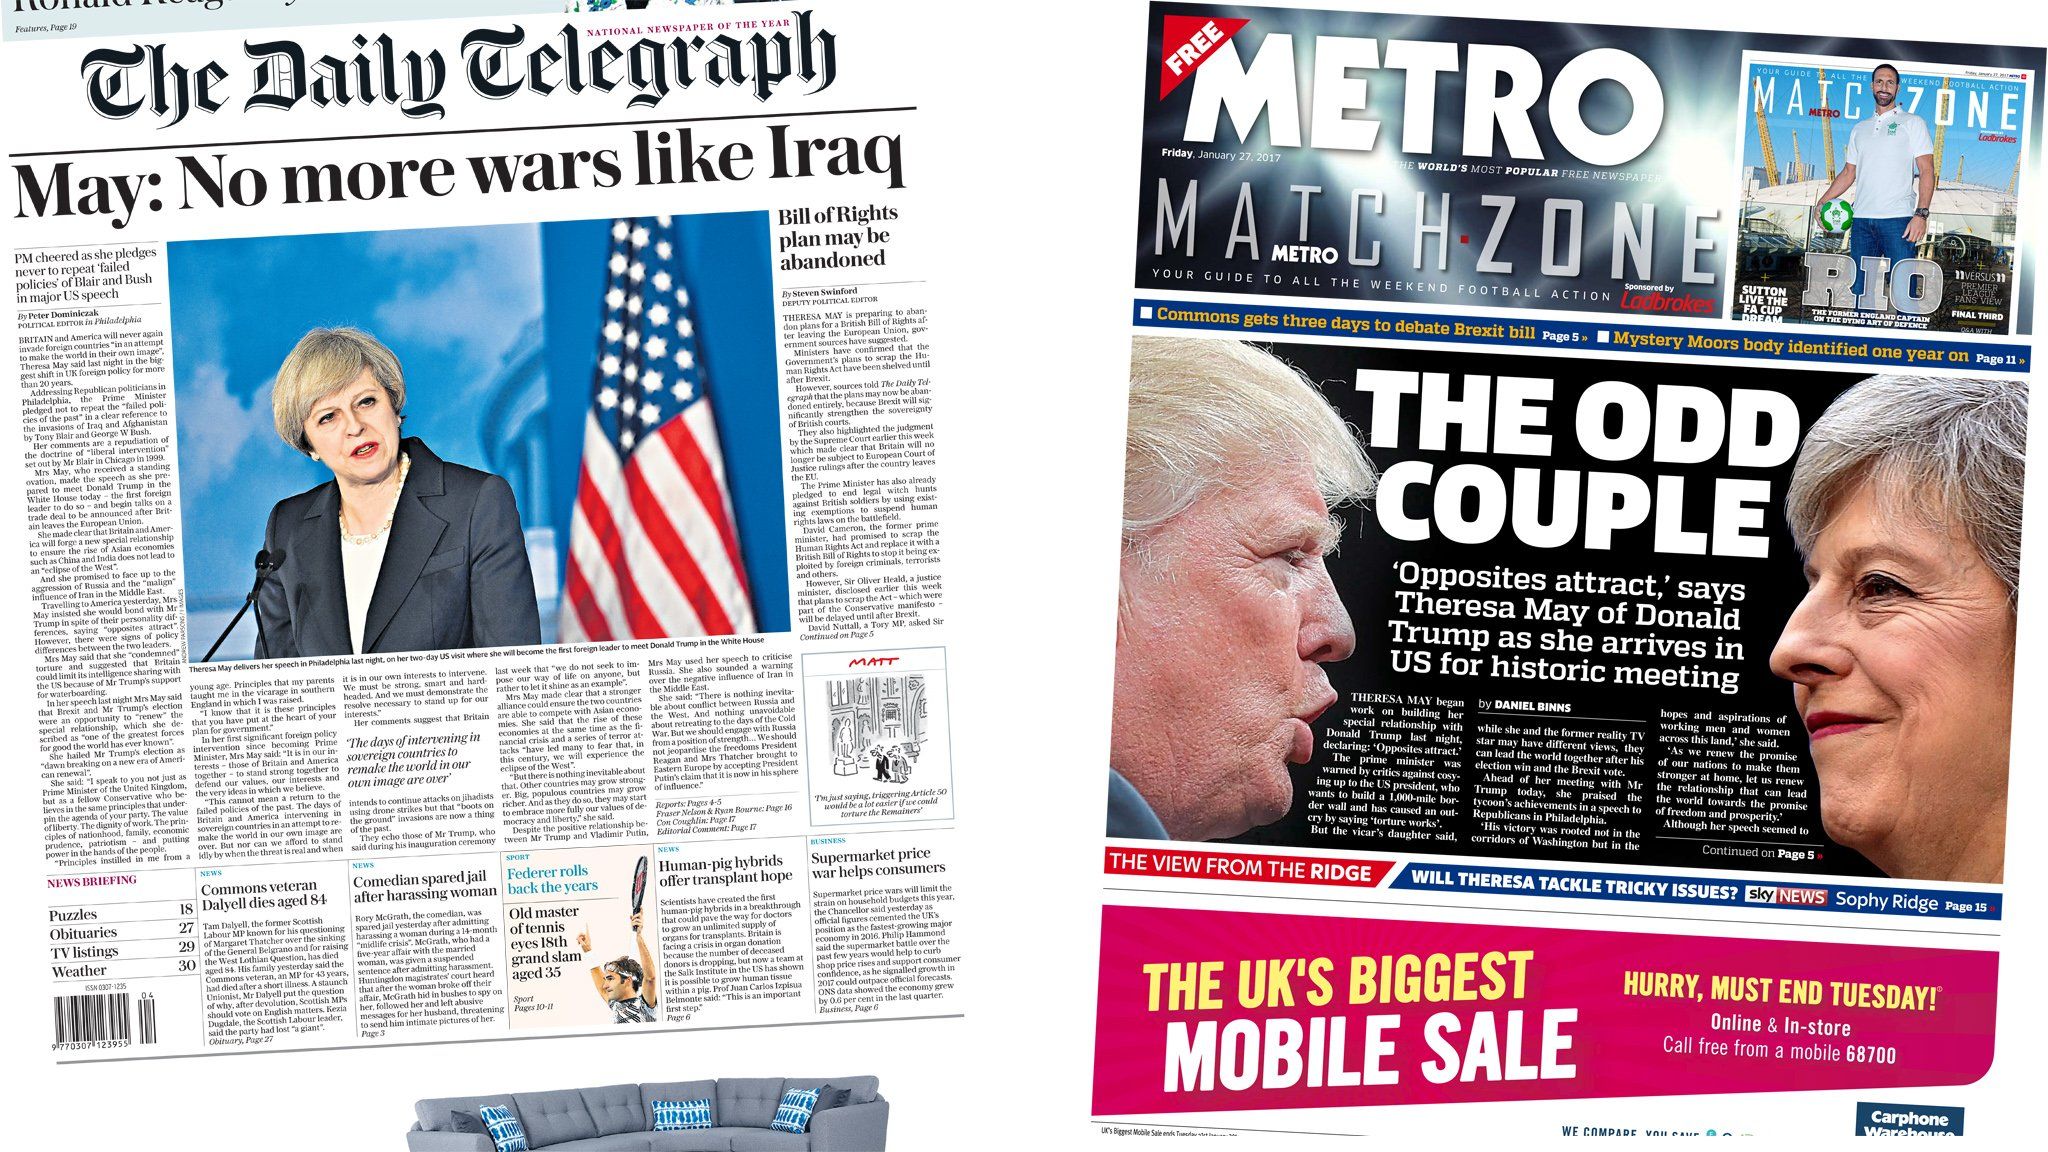 Daily Telegraph and Metro front pages